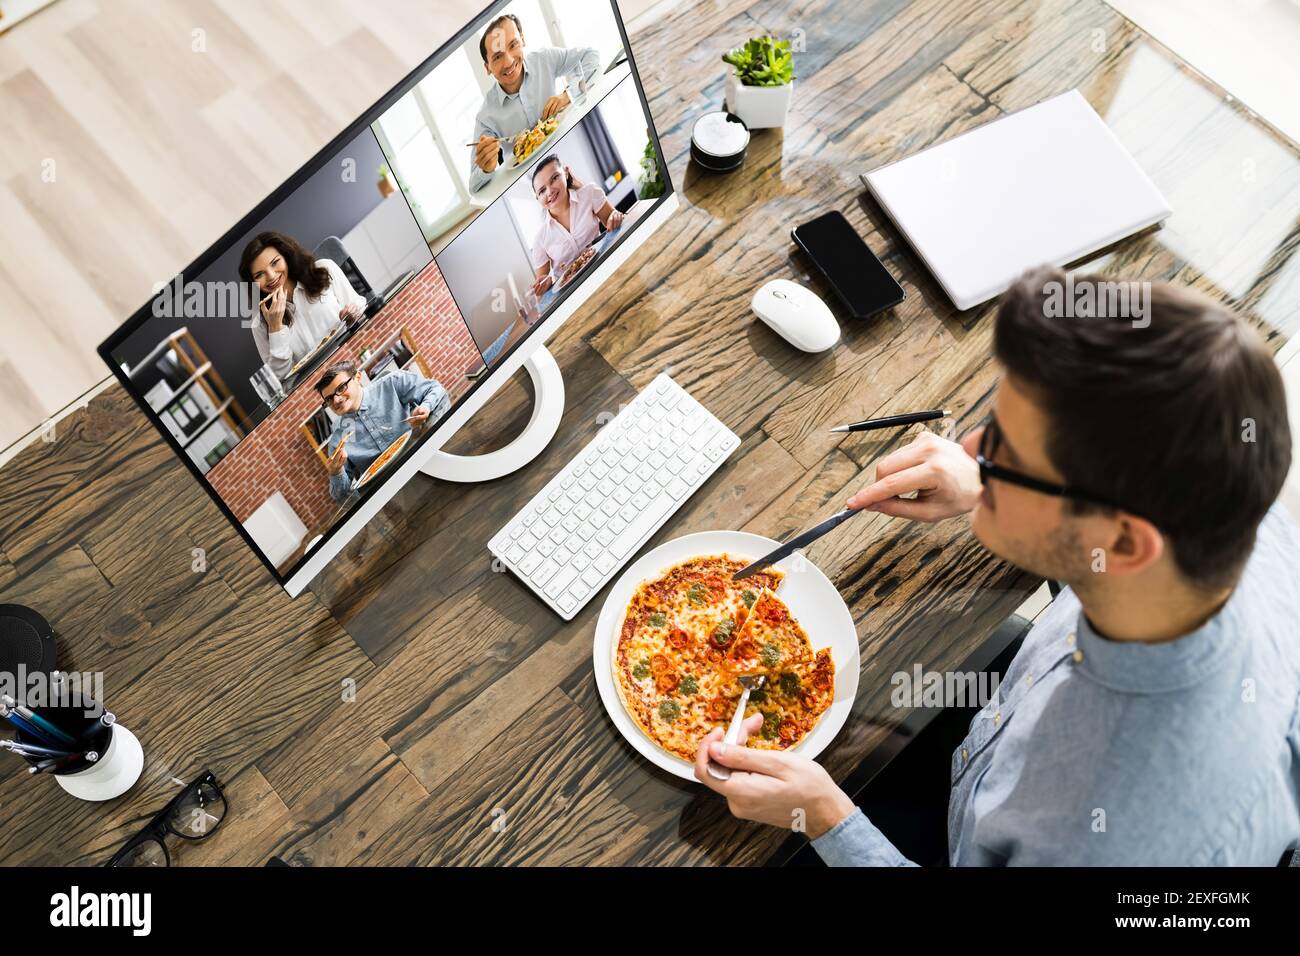 Virtual Office Video Conference Eating Party Or Break Stock Photo